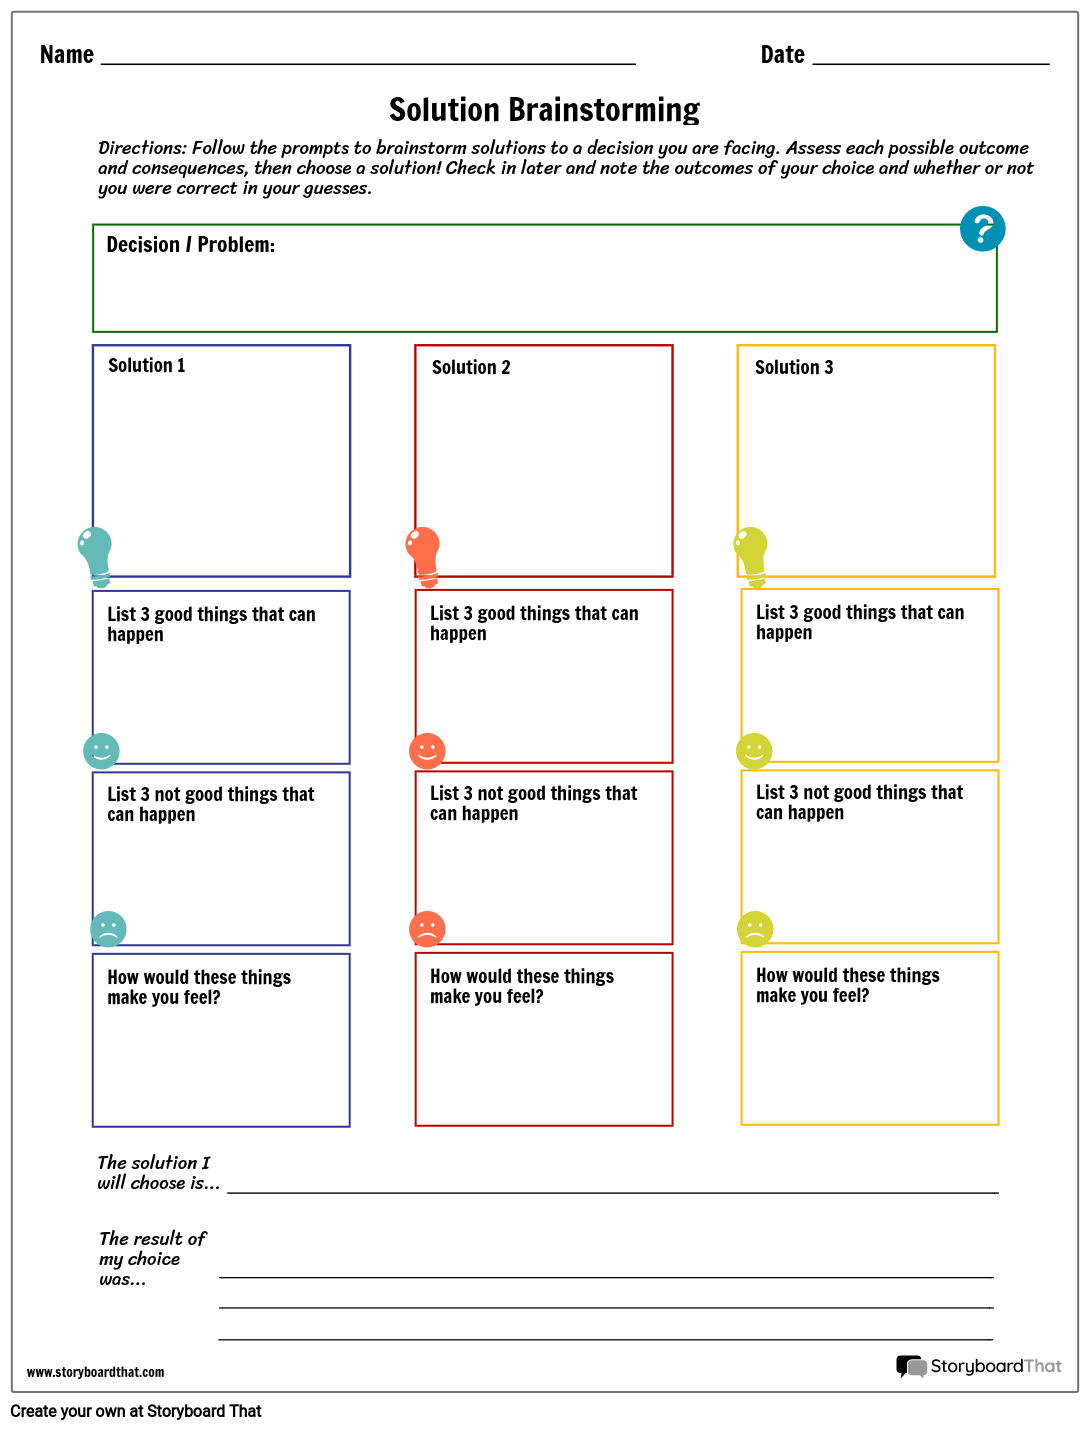 Decision Making Worksheet  Brainstorming Solutions Within Making Good Choices Worksheet